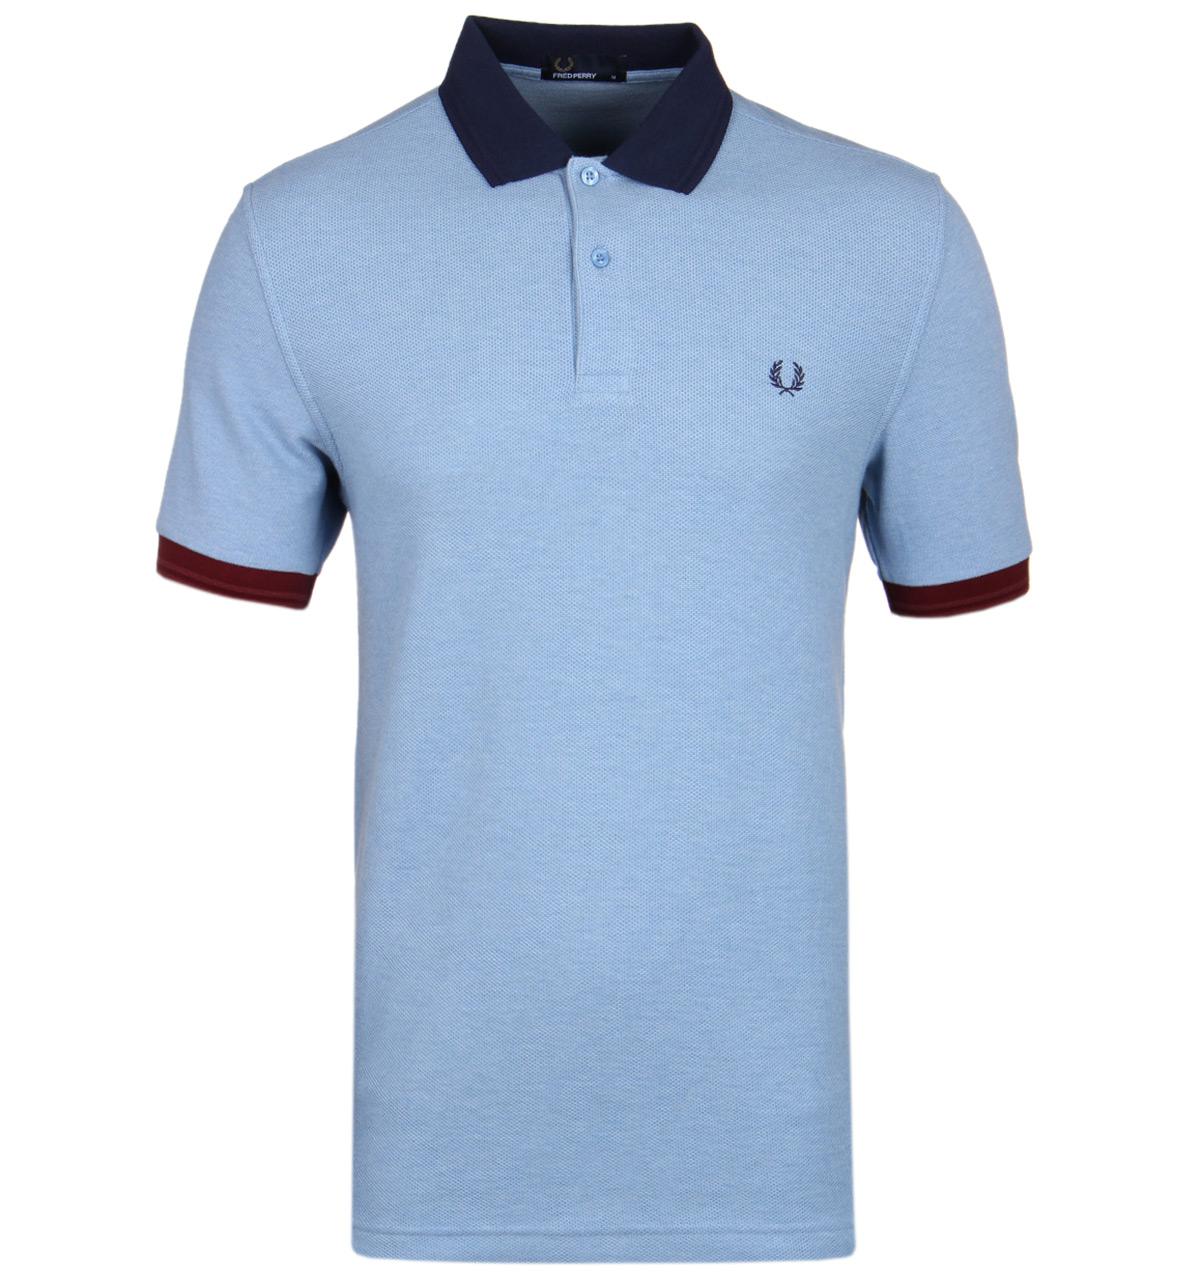 Lyst - Fred Perry Sky Blue Pique Panel Short Sleeve Polo Shirt in Blue ...